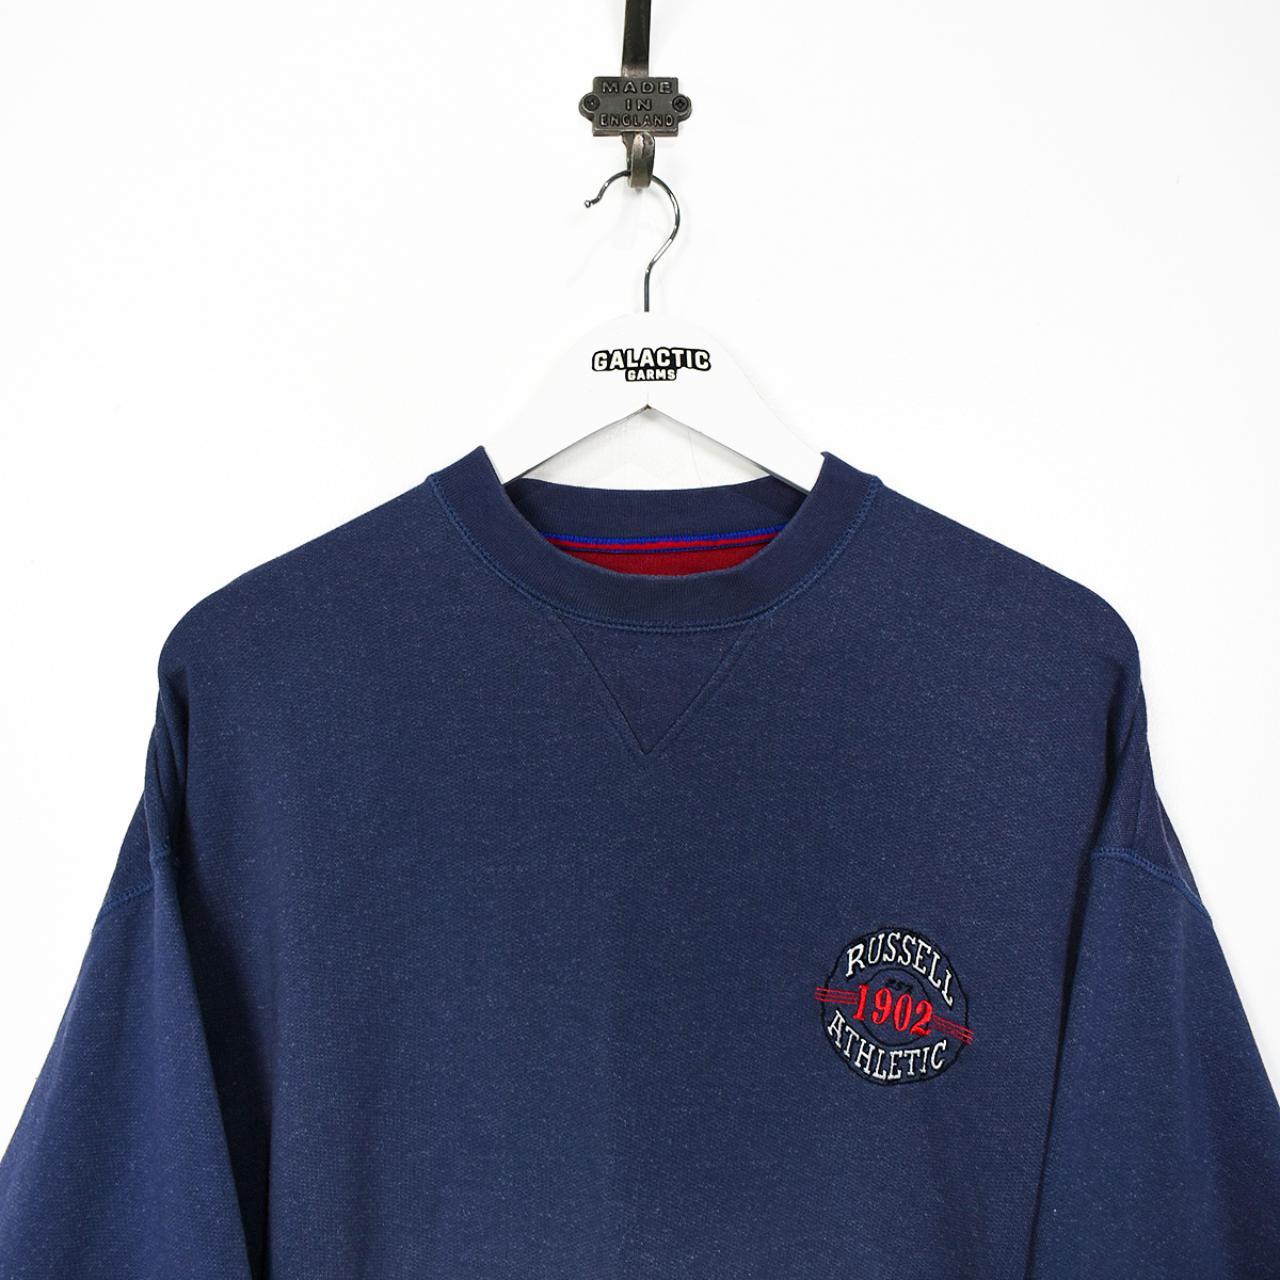 Product Image 2 - Russell Athletic Sweatshirt

Condition:  Very